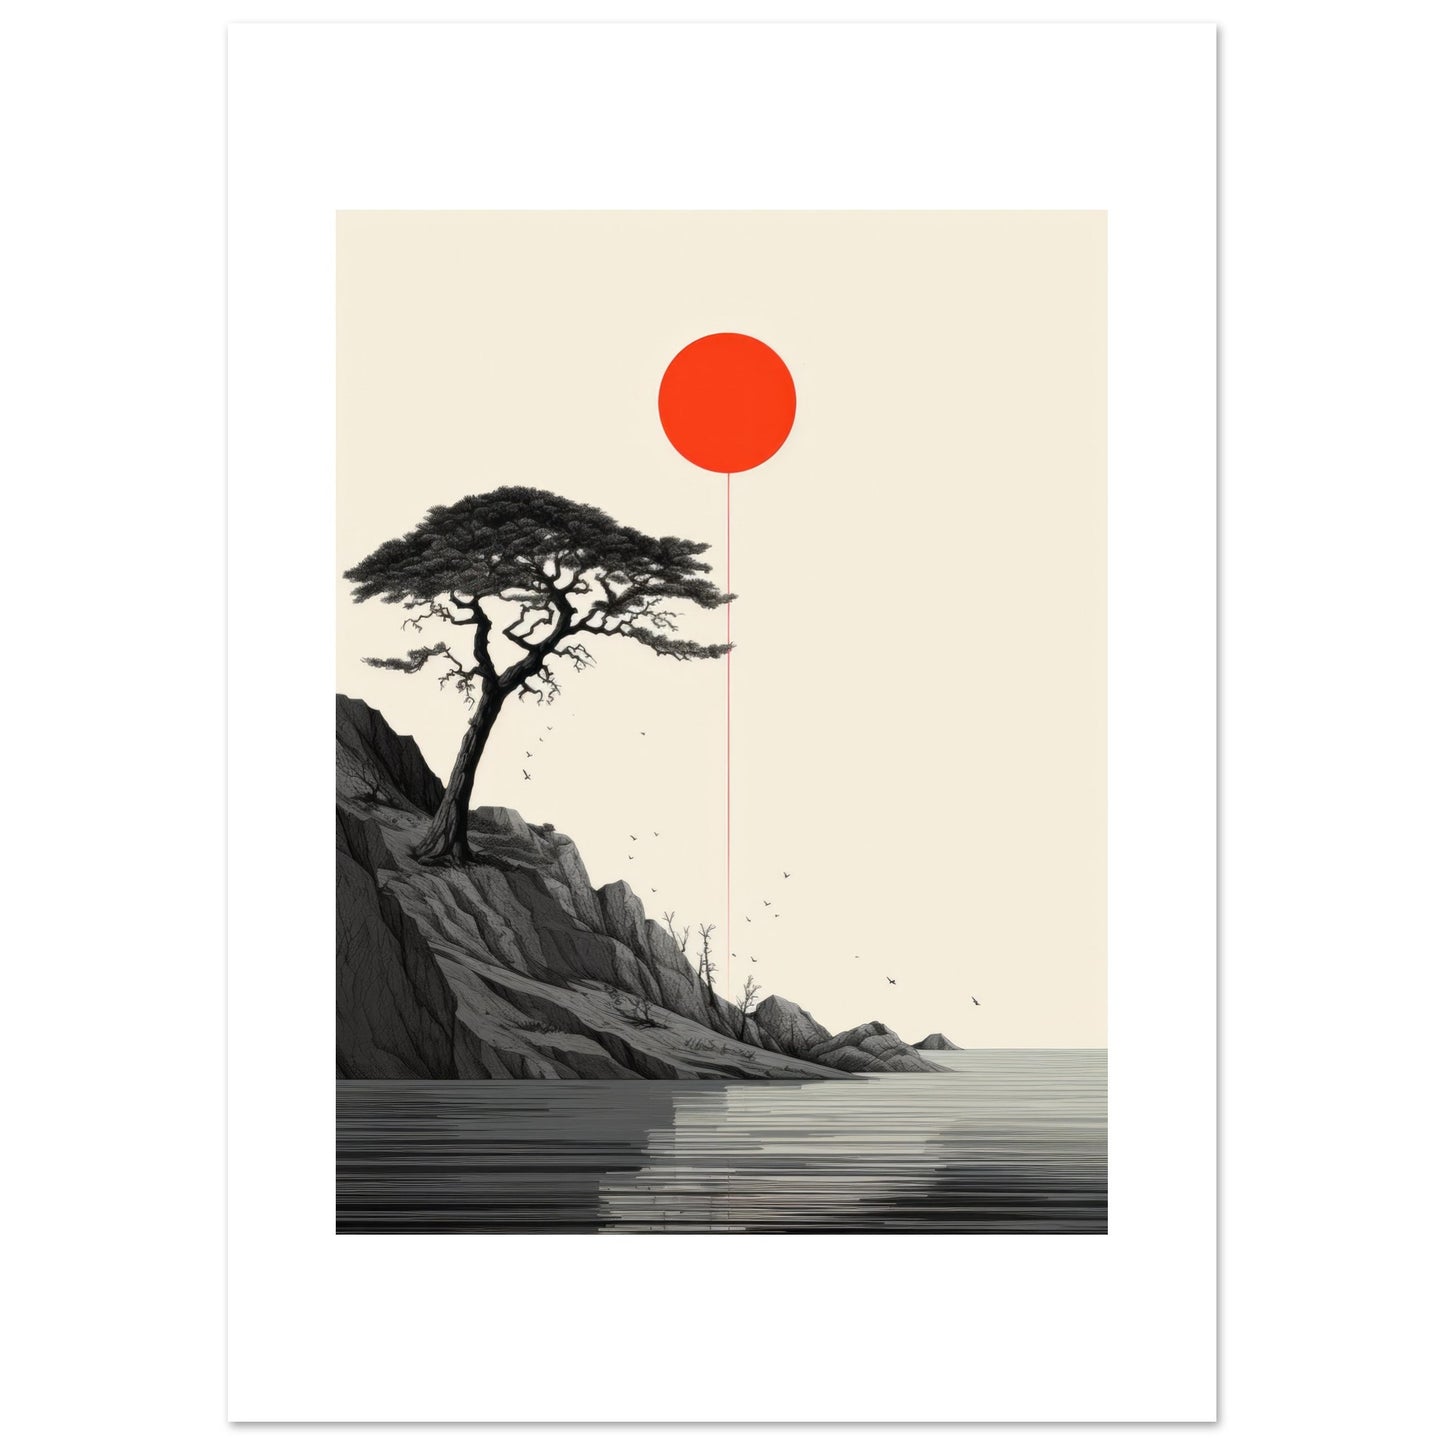 Art print framed in black, depicting a grayscale landscape with a rugged cliff, a solitary tree with detailed branches, and calm waters. Above the tree is a bold red circle, representing the sun or another celestial body, connected to the tree by a thin line.